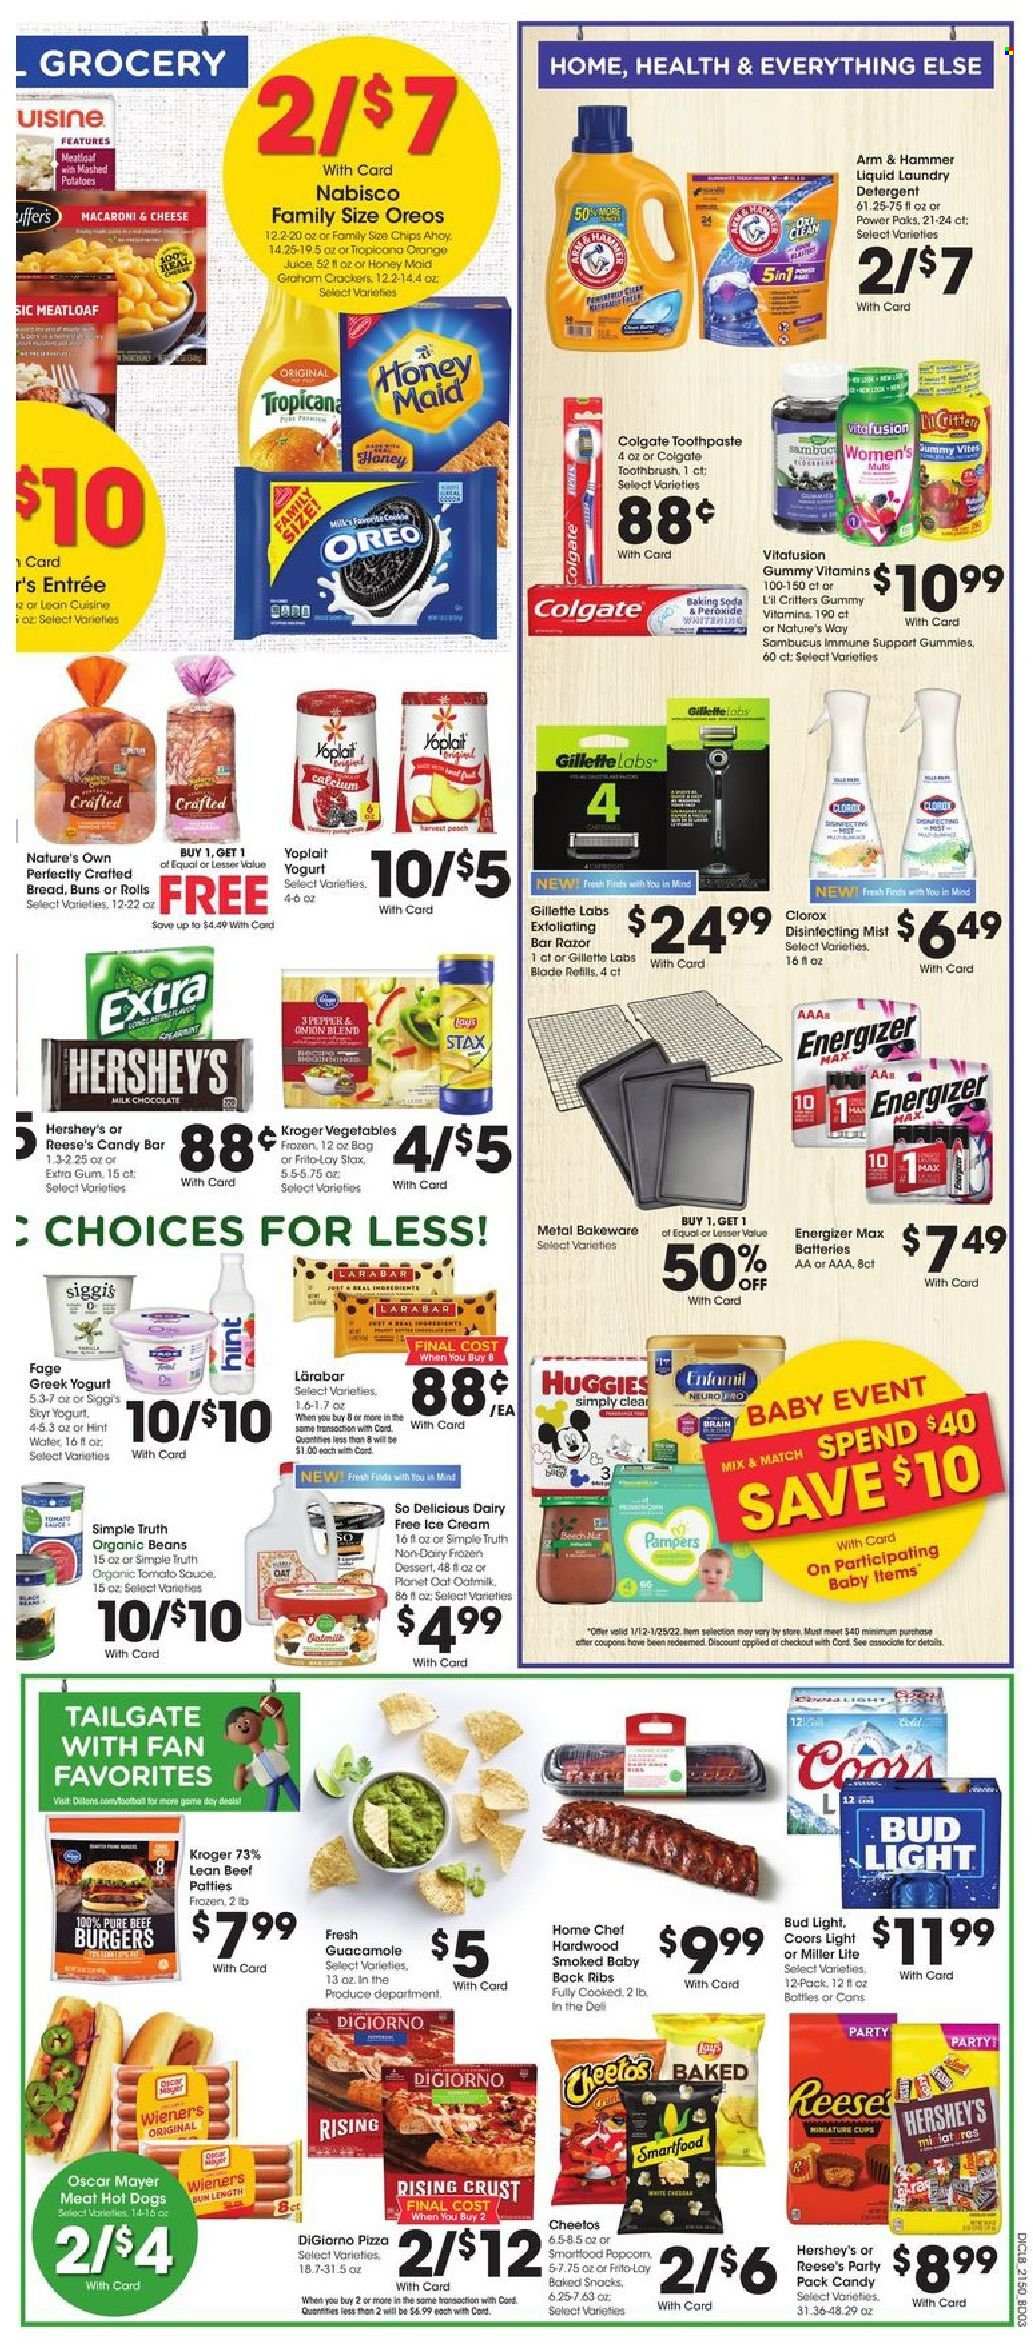 thumbnail - Dillons Flyer - 01/12/2022 - 01/18/2022 - Sales products - buns, beans, macaroni & cheese, mashed potatoes, hot dog, pizza, hamburger, meatloaf, Lean Cuisine, Oscar Mayer, guacamole, greek yoghurt, Oreo, yoghurt, Yoplait, oat milk, ice cream, Reese's, Hershey's, dairy free ice cream, crackers, Smartfood, Frito-Lay, ARM & HAMMER, tomato sauce, Honey Maid, orange juice, juice, beer, Bud Light, beef meat, pork meat, pork ribs, pork back ribs, Huggies, Pampers, detergent, Clorox, laundry detergent, Colgate, toothbrush, toothpaste, Gillette, razor, cup, bakeware, battery, Energizer, calcium, Nature's Own, Miller Lite, Coors. Page 6.